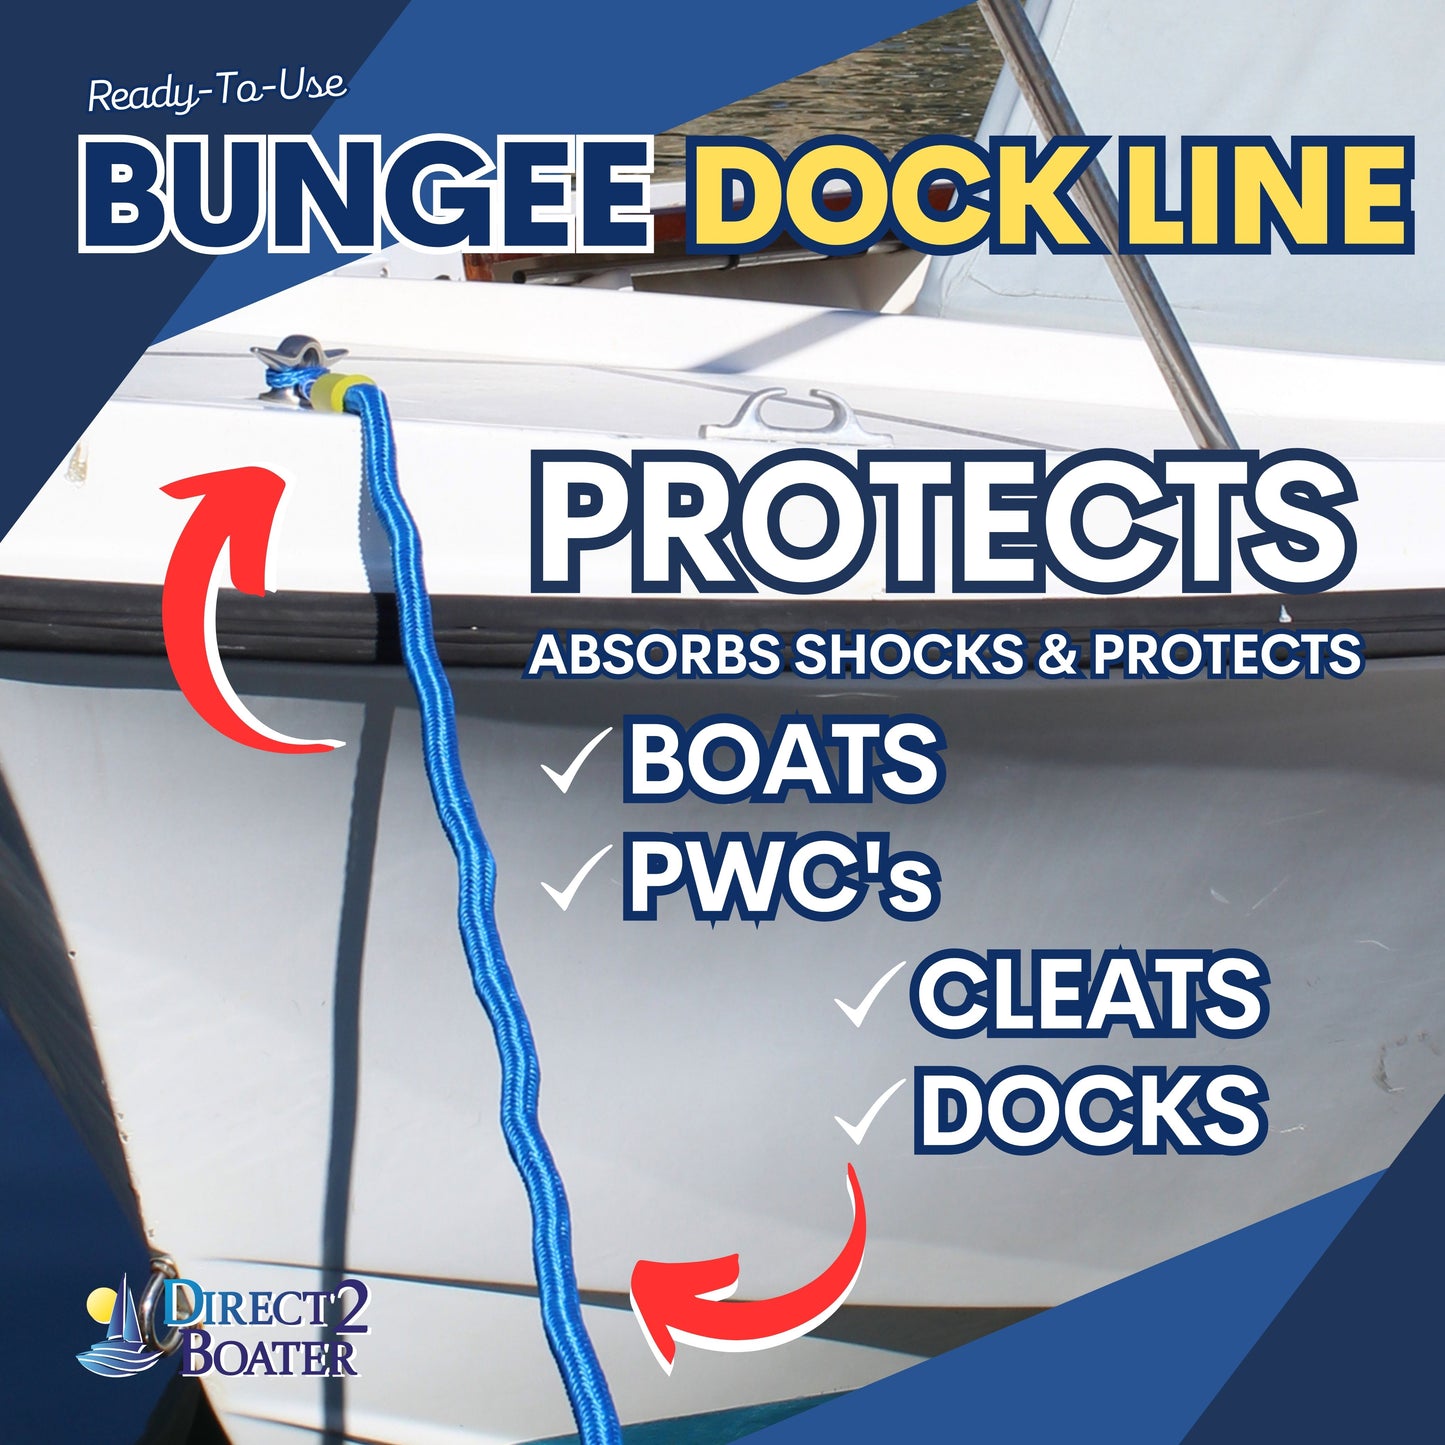 4' Bungee Dock Line - Blue - Stretches to 5.5' - Ideal for Boats, PWC, Jet Ski, Dinghy, Kayak & Pontoon up to 4000#